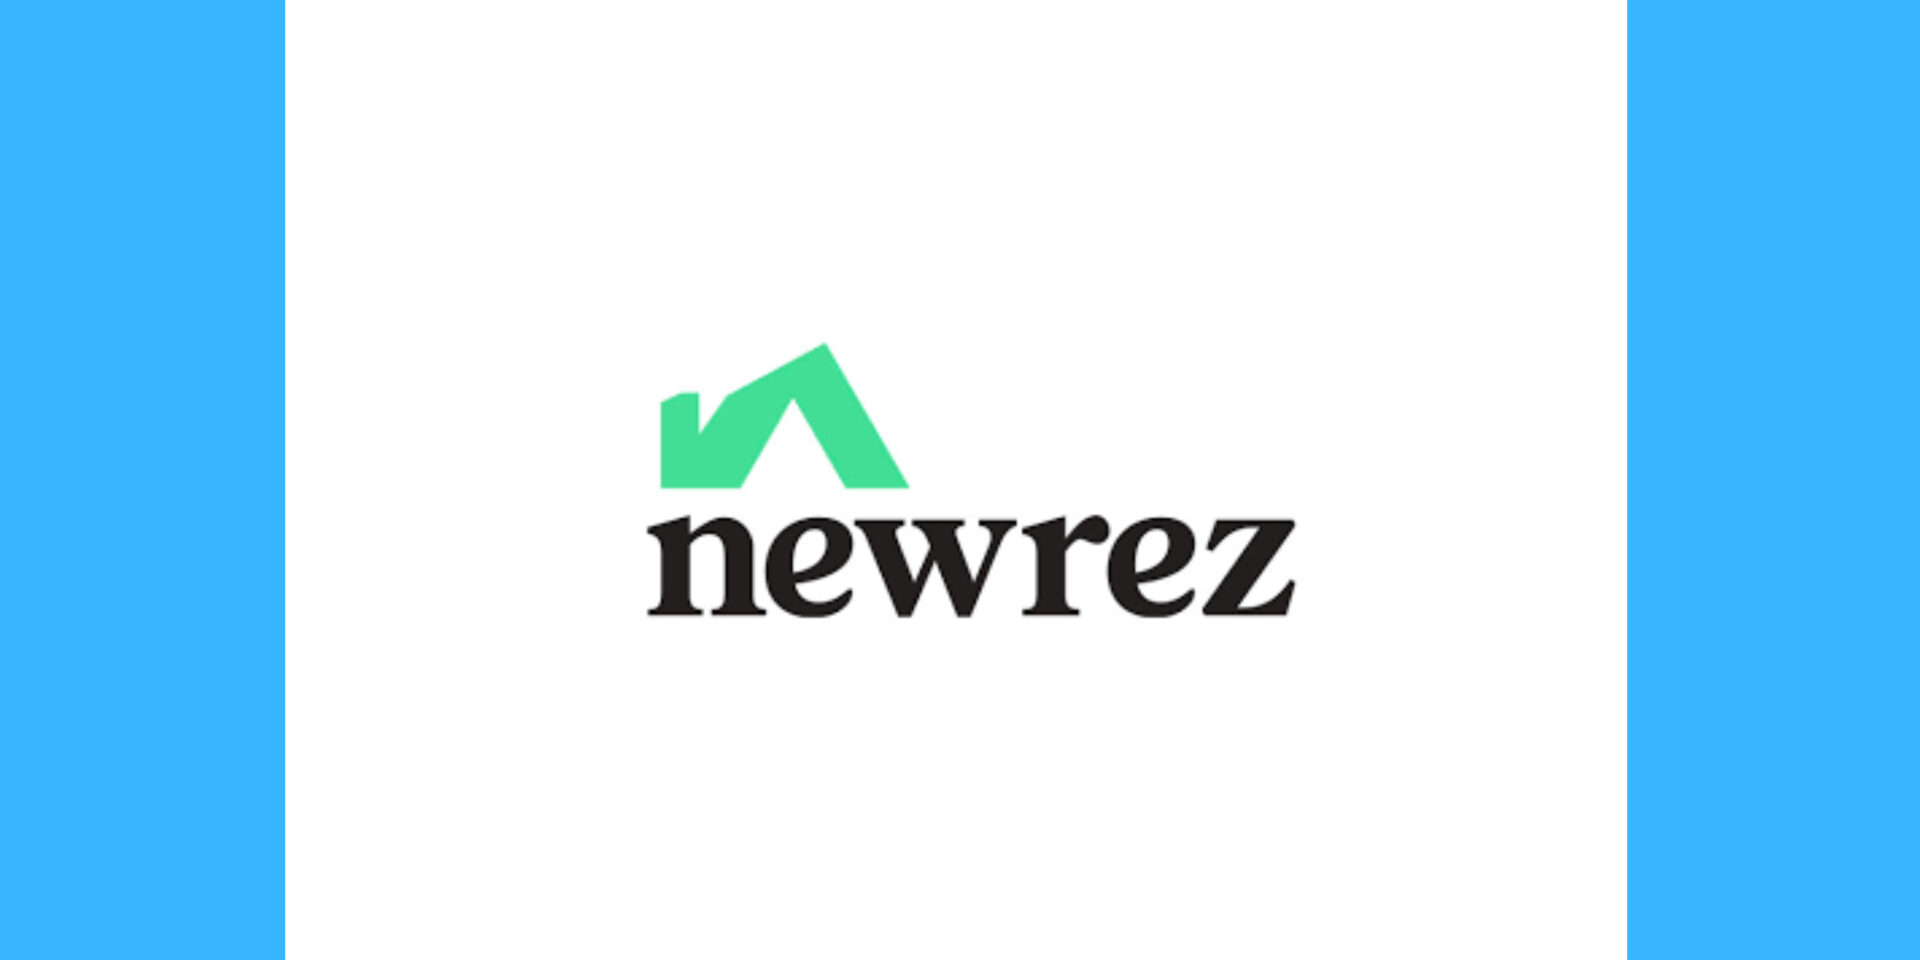 Newrez Launches 1% Down Payment Product For Low Income, First Time Buyers